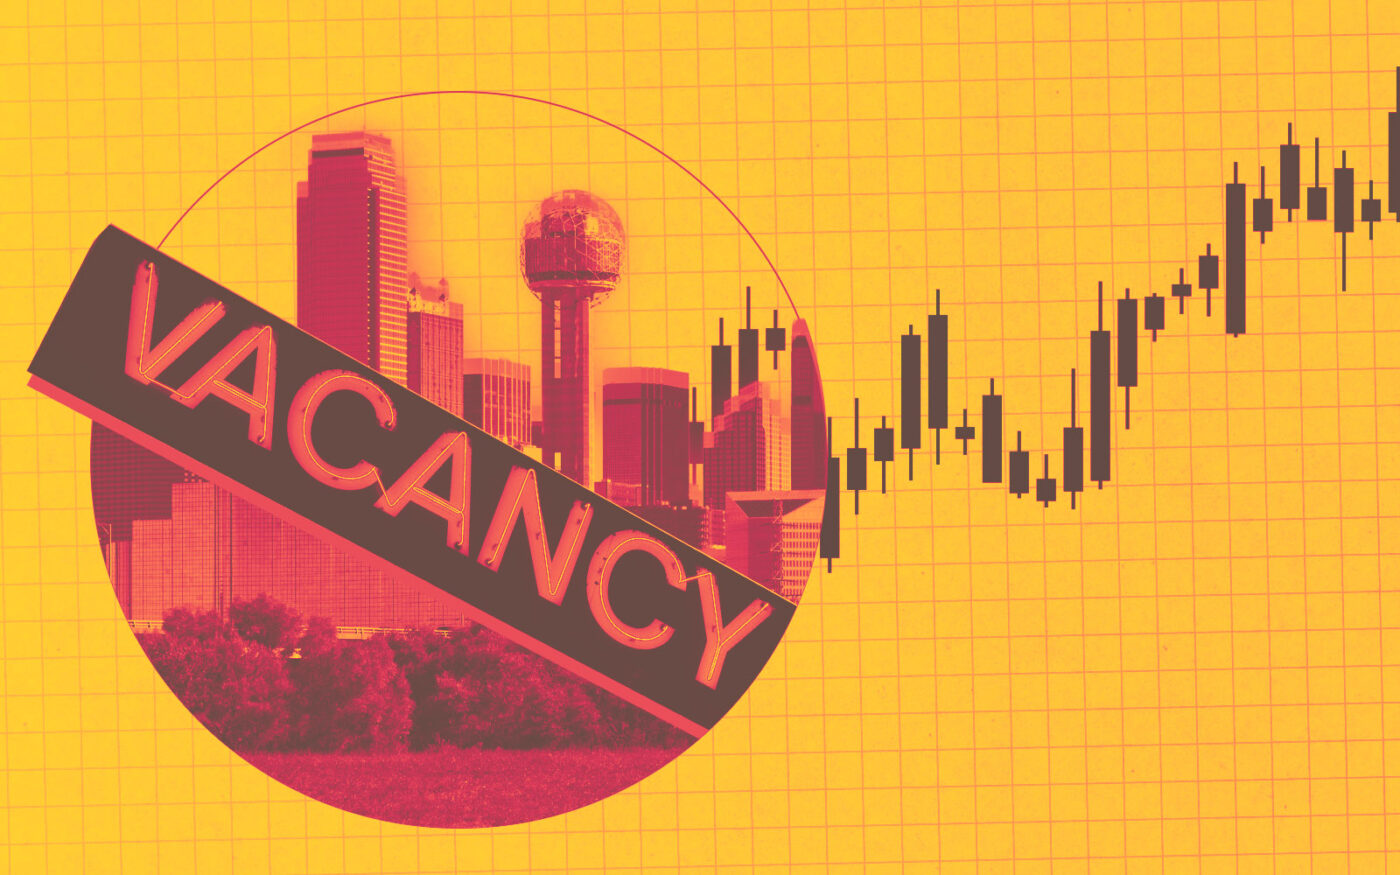 Dallas Office Vacancies hit 26% in the First Quarter